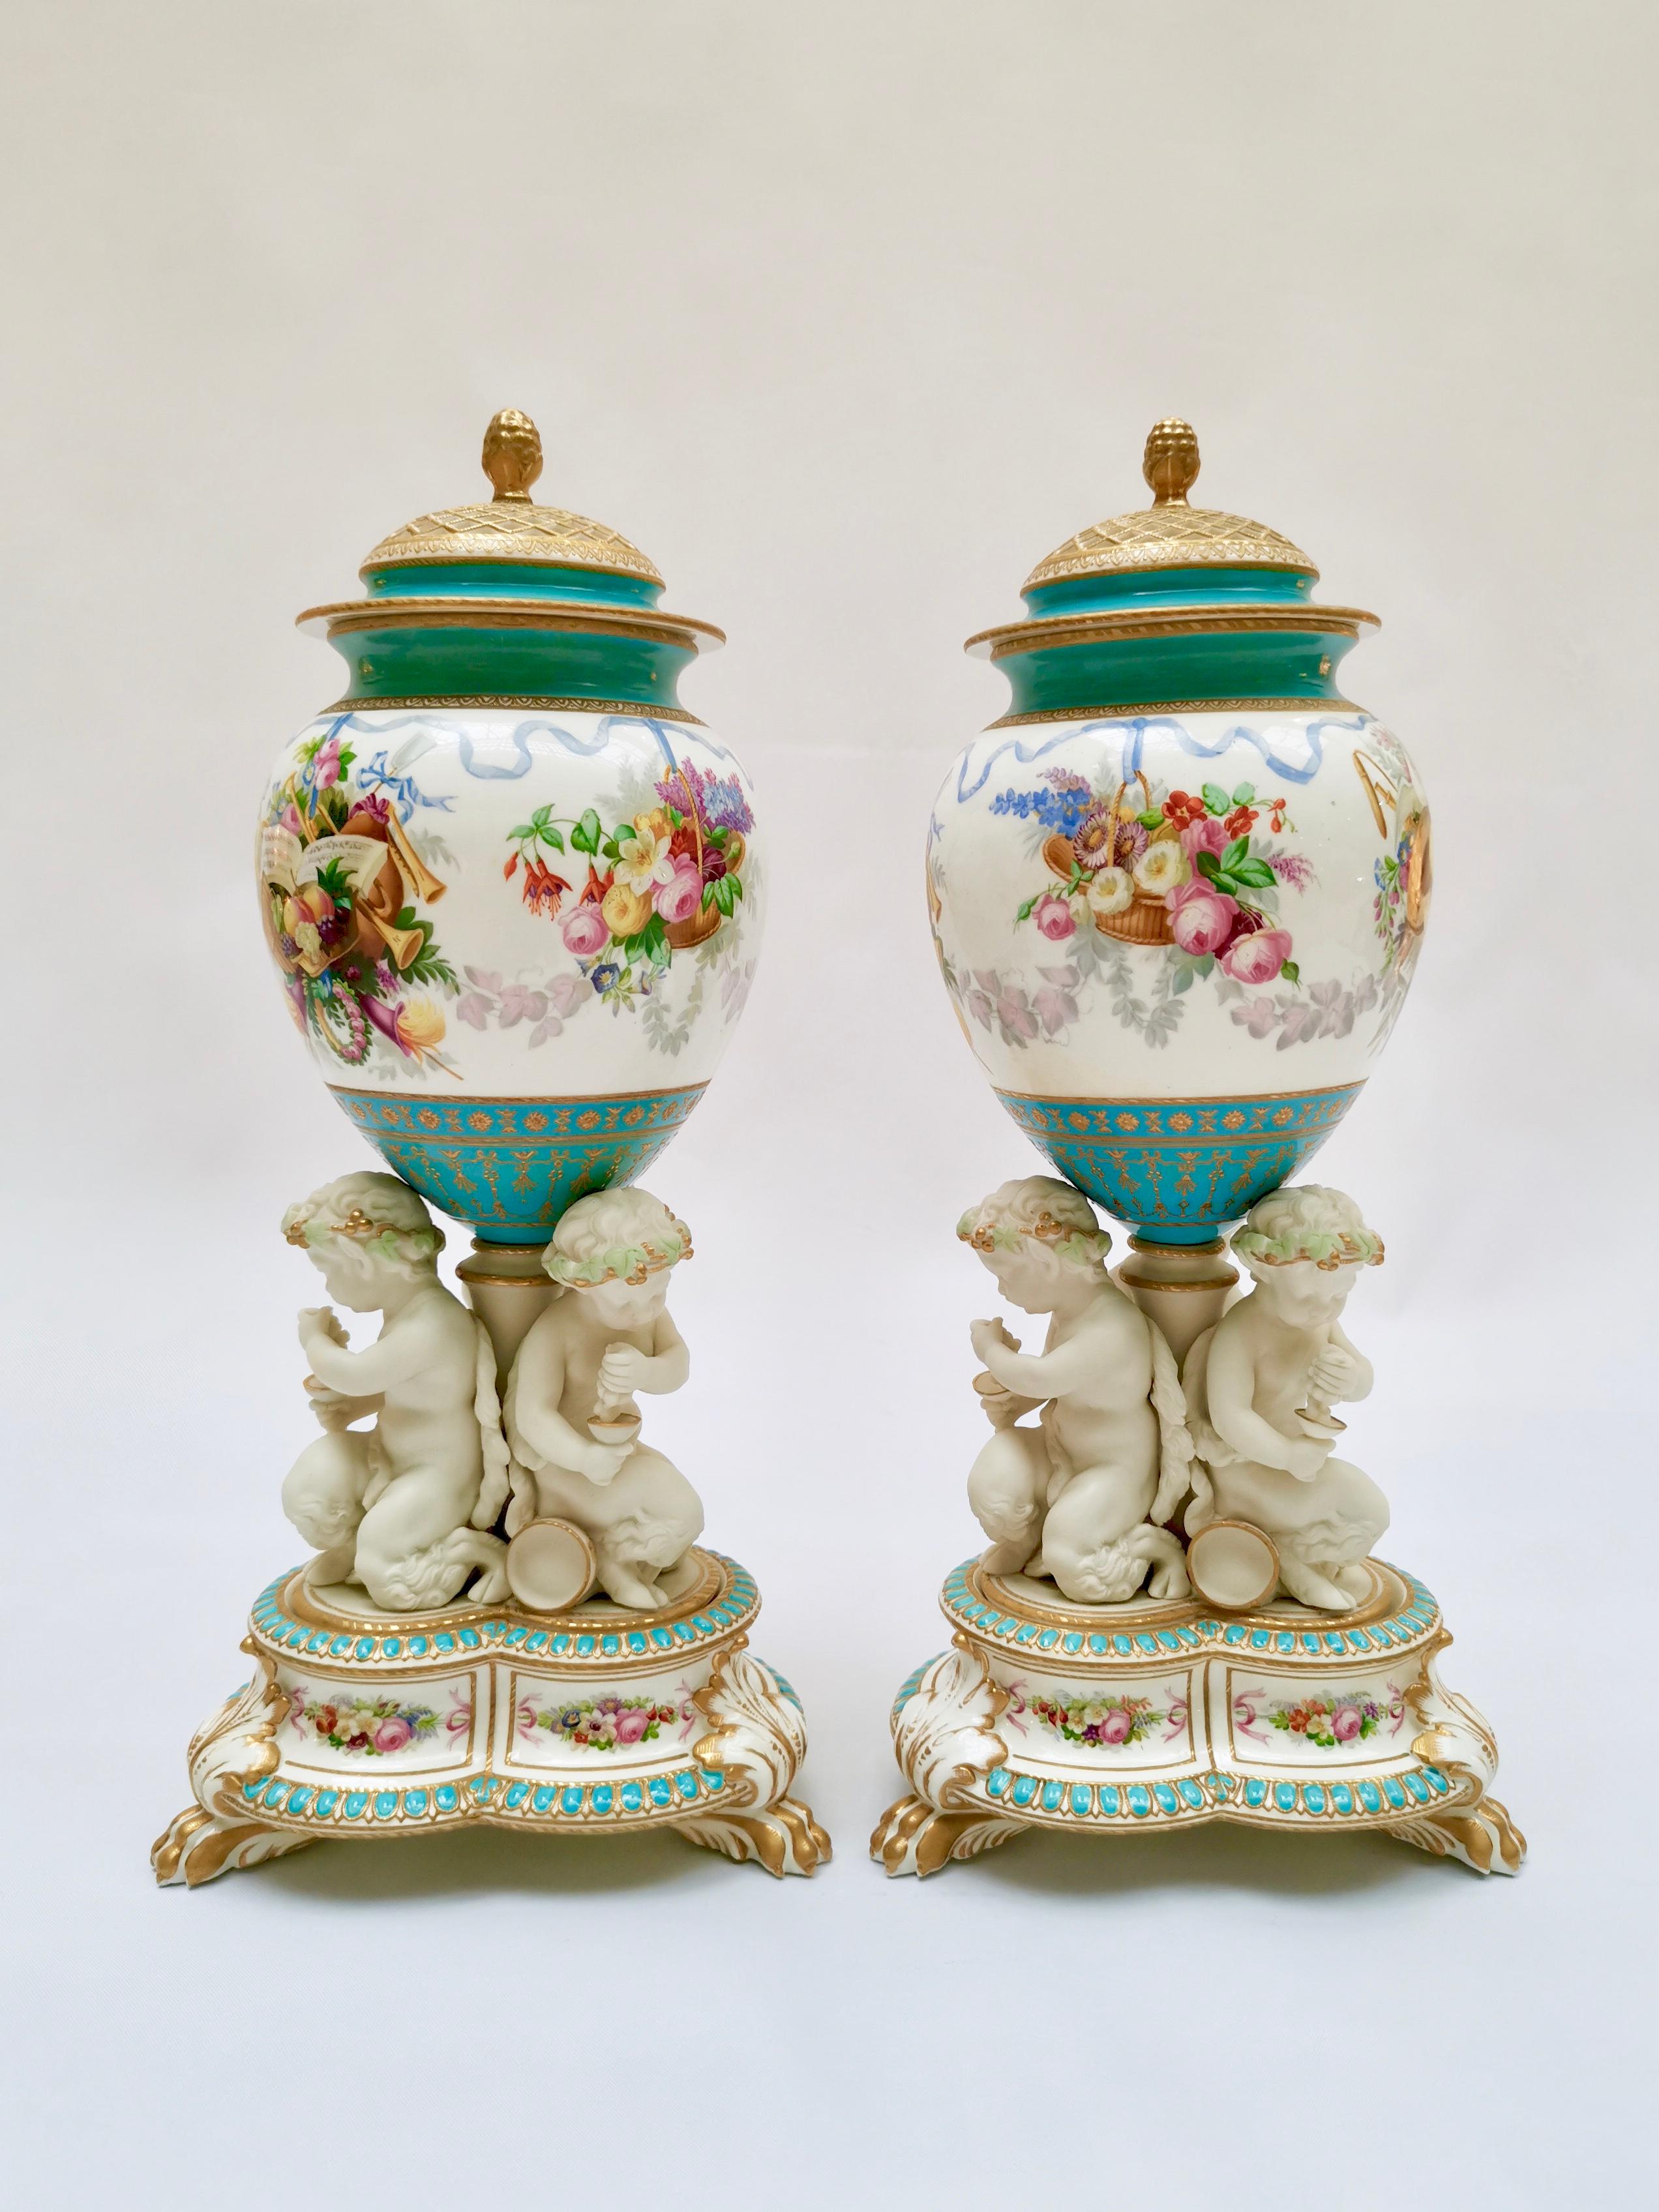 This is a stunning pair of two lidded potpourri vases made by Copeland in 1891. Potpourri vases were used in the 19th century to fill with scented materials to freshen up the air inside the home. These vases have outstanding bases with parian putti